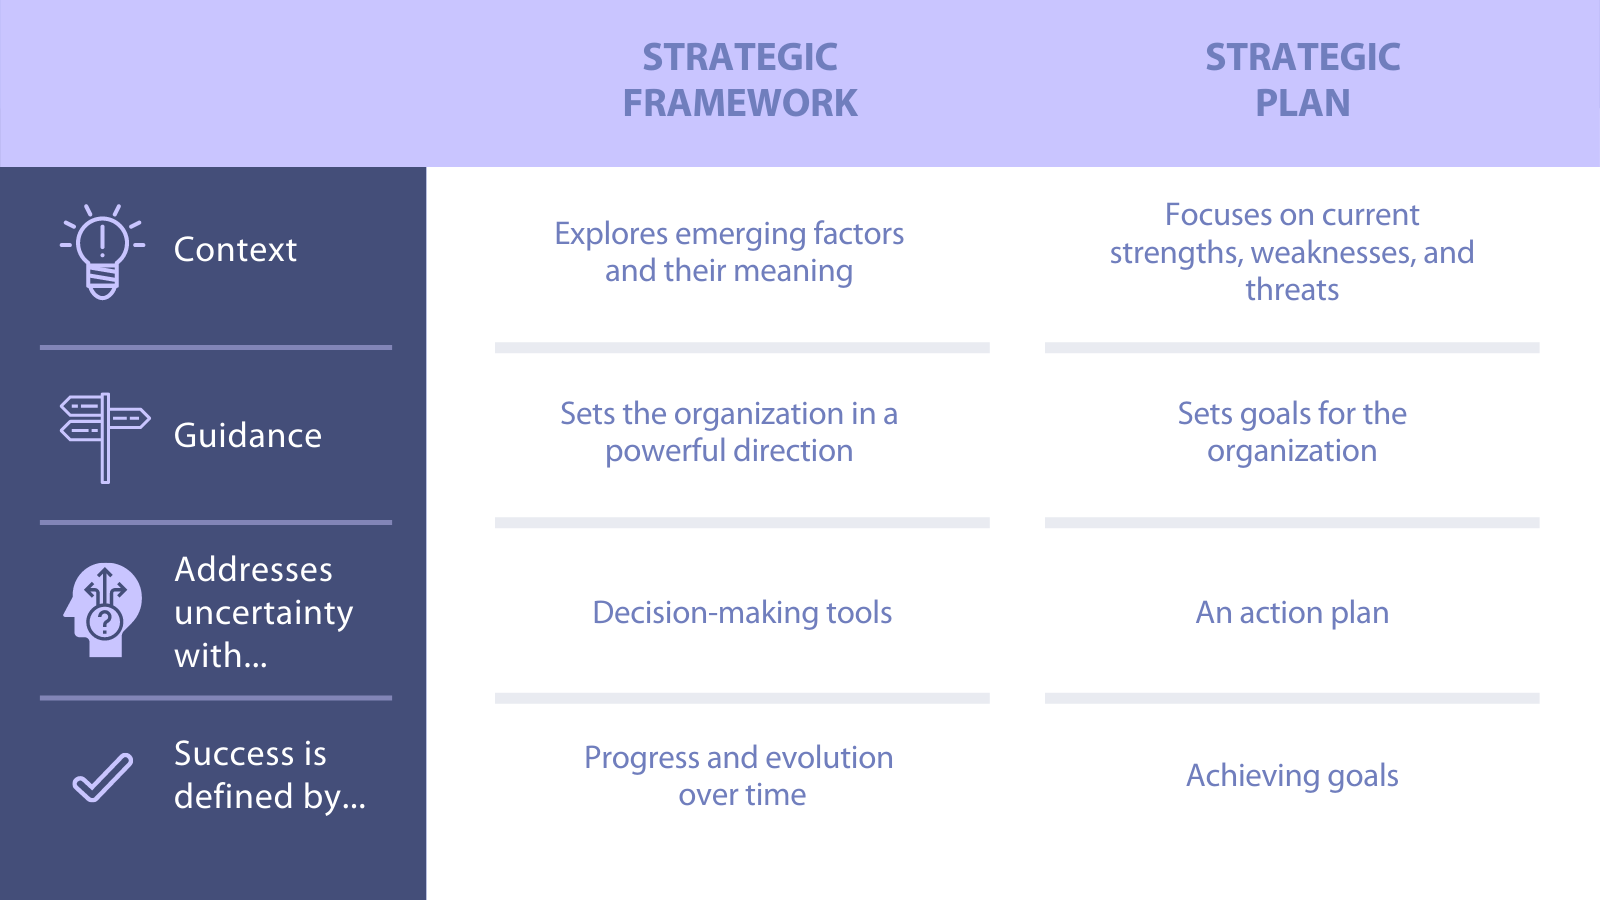 A table that describes the differences between a strategic framework and strategic plan. The framework: explores emerging factors and their meaning, sets the organization in a powerful direction, is a decision-making tool, and measures success by progress and evolution over time. A strategic plan focused on strengths and weaknesses, sets goals for the org., Acts as an action plan, and measures success by achieving goals.